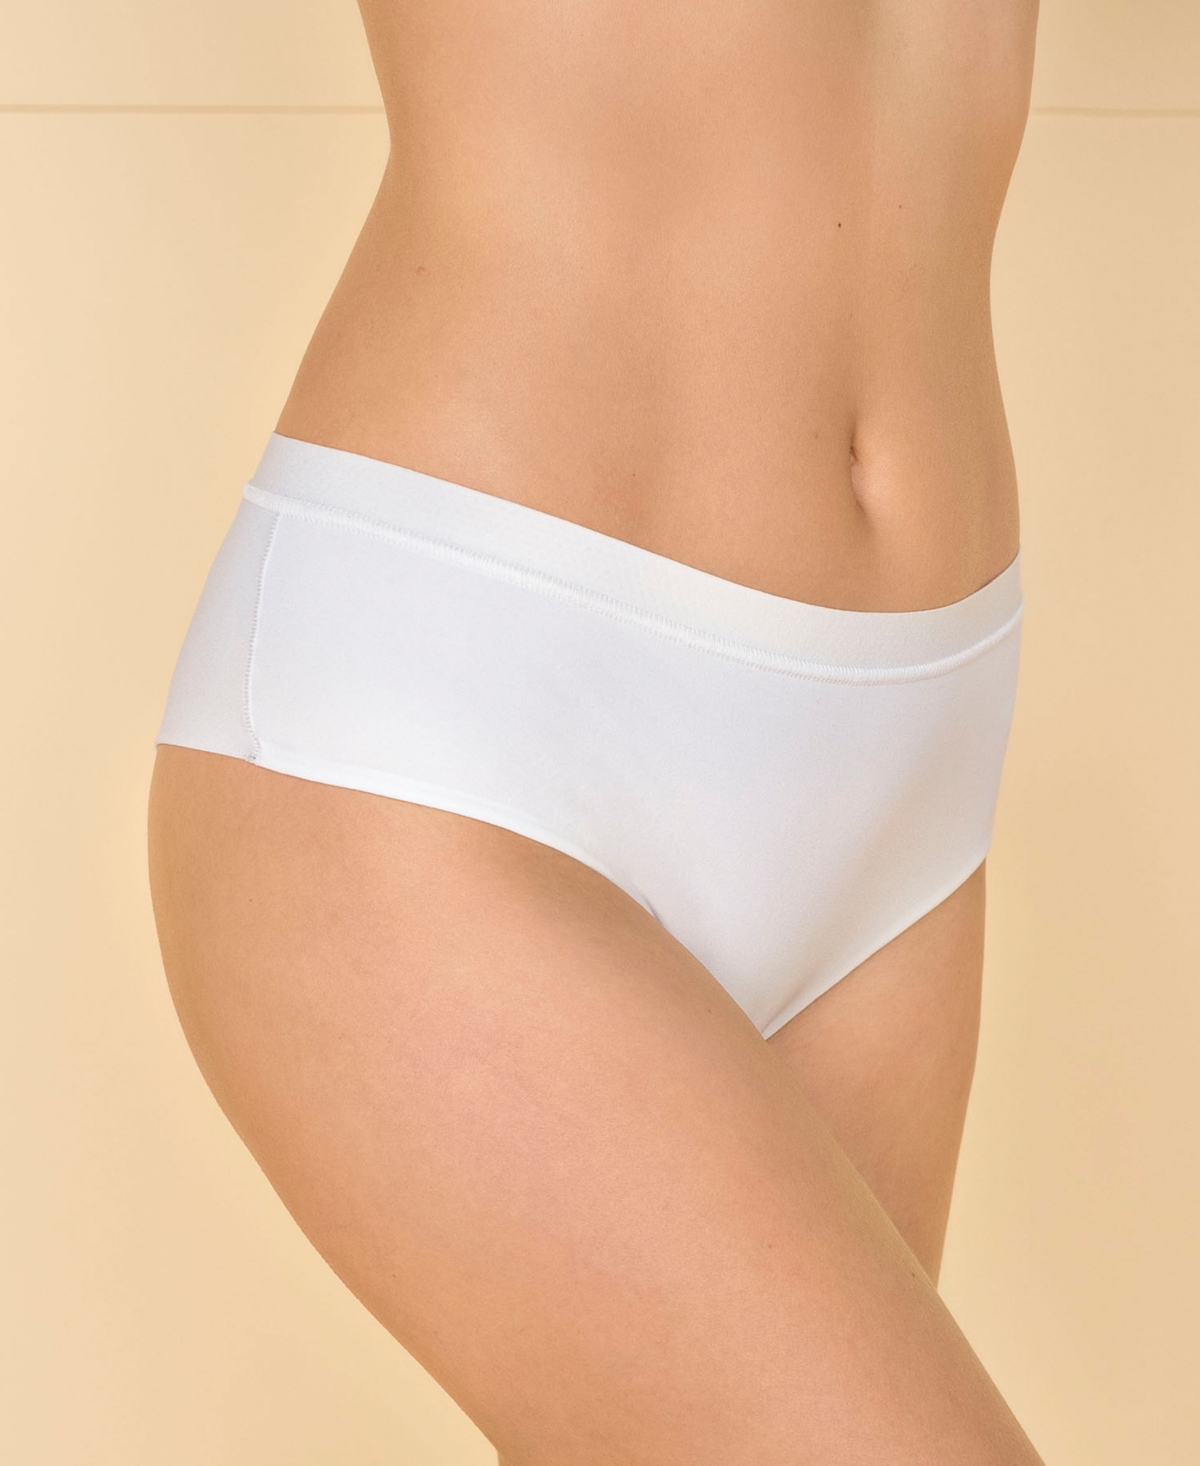 Women's One-Size-Fits-All Invisible Cheeky Panty - Beige